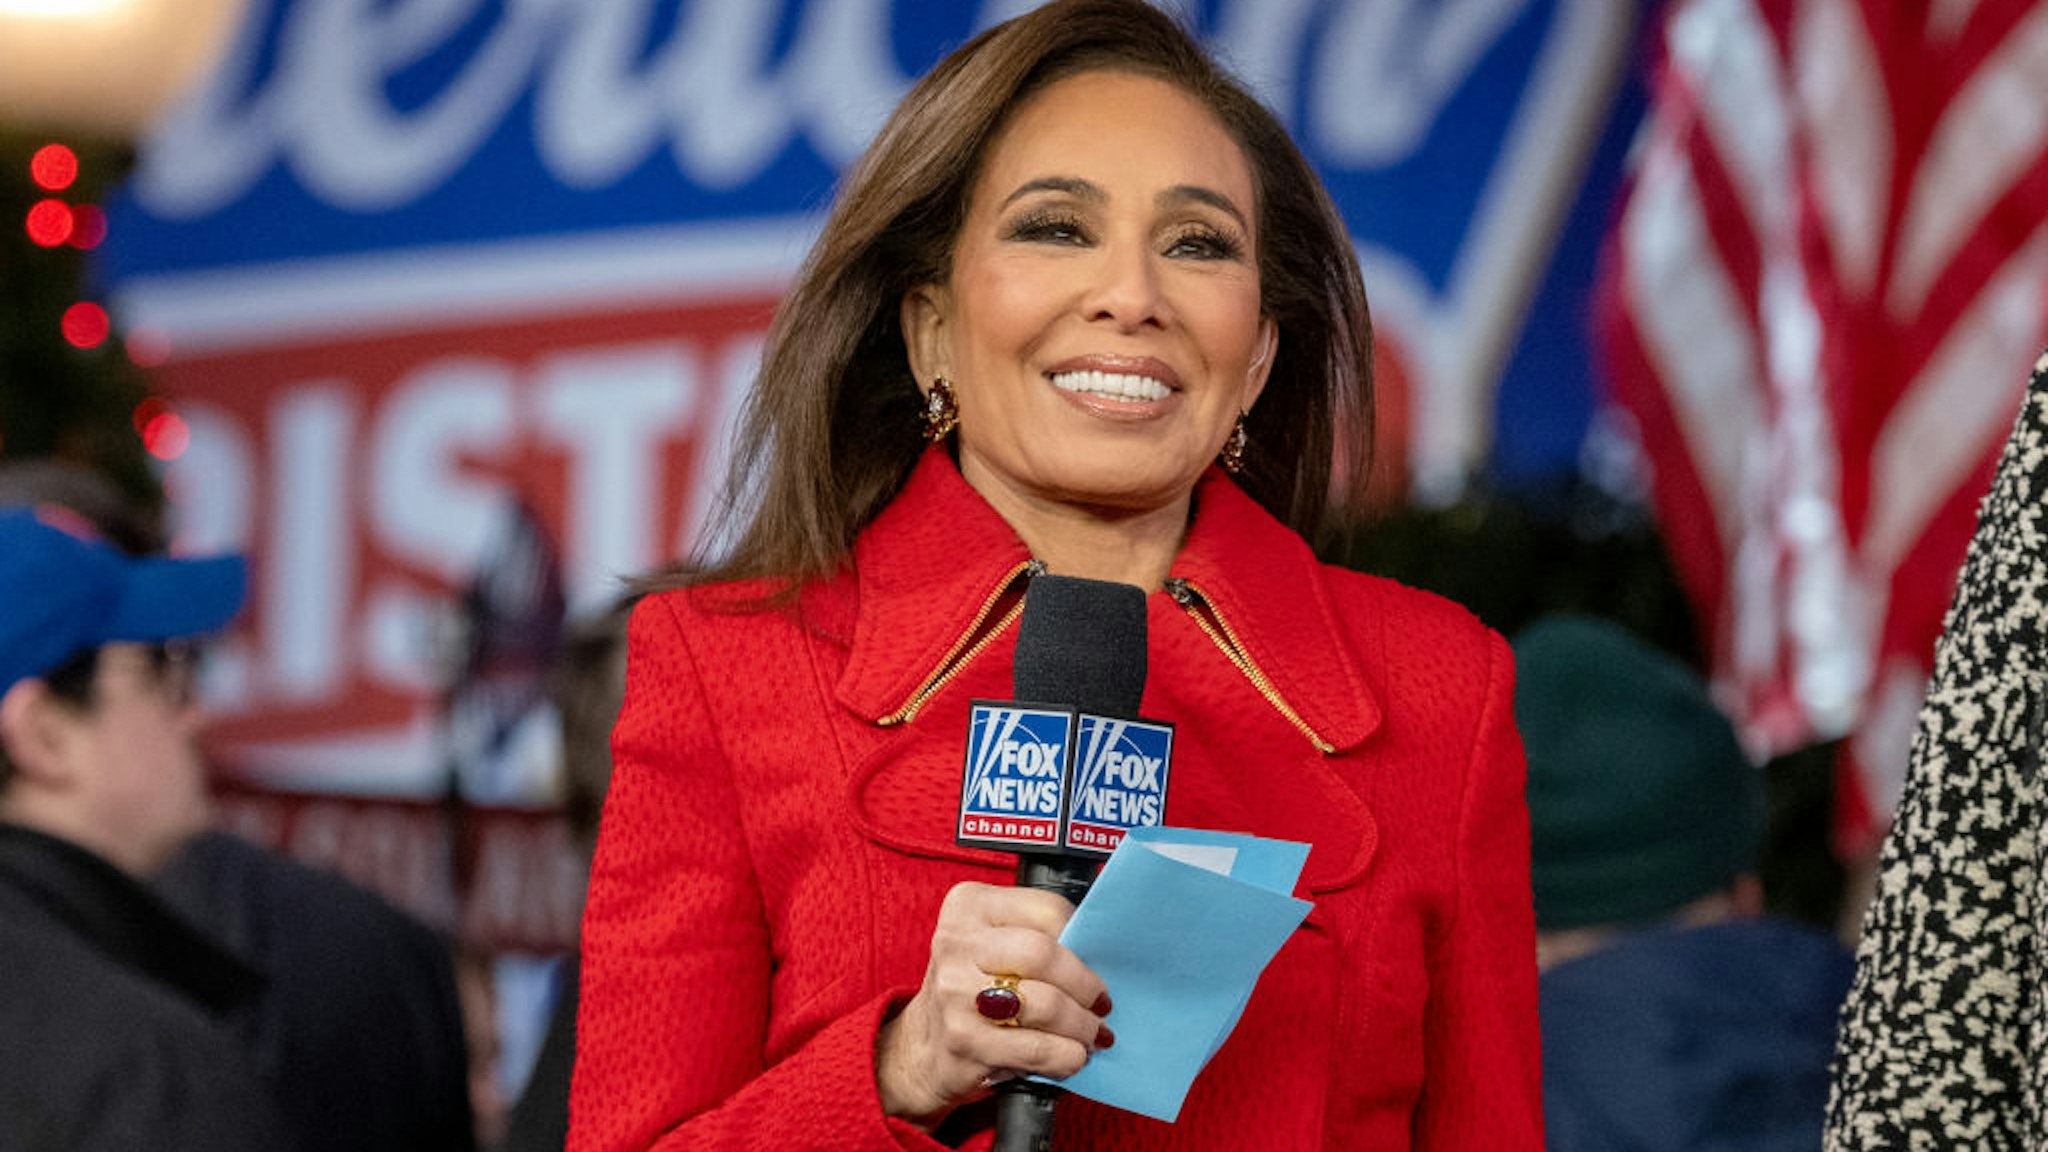 Jeanine Pirro attends the new All-American Christmas Tree lighting outside News Corporation at Fox Square on December 9, 2021 in New York City. The original 50-foot tree displayed on FOX Square in Midtown Manhattan was allegedly set on fire by a man during the early morning hours of December 8, 2021. He was later arrested